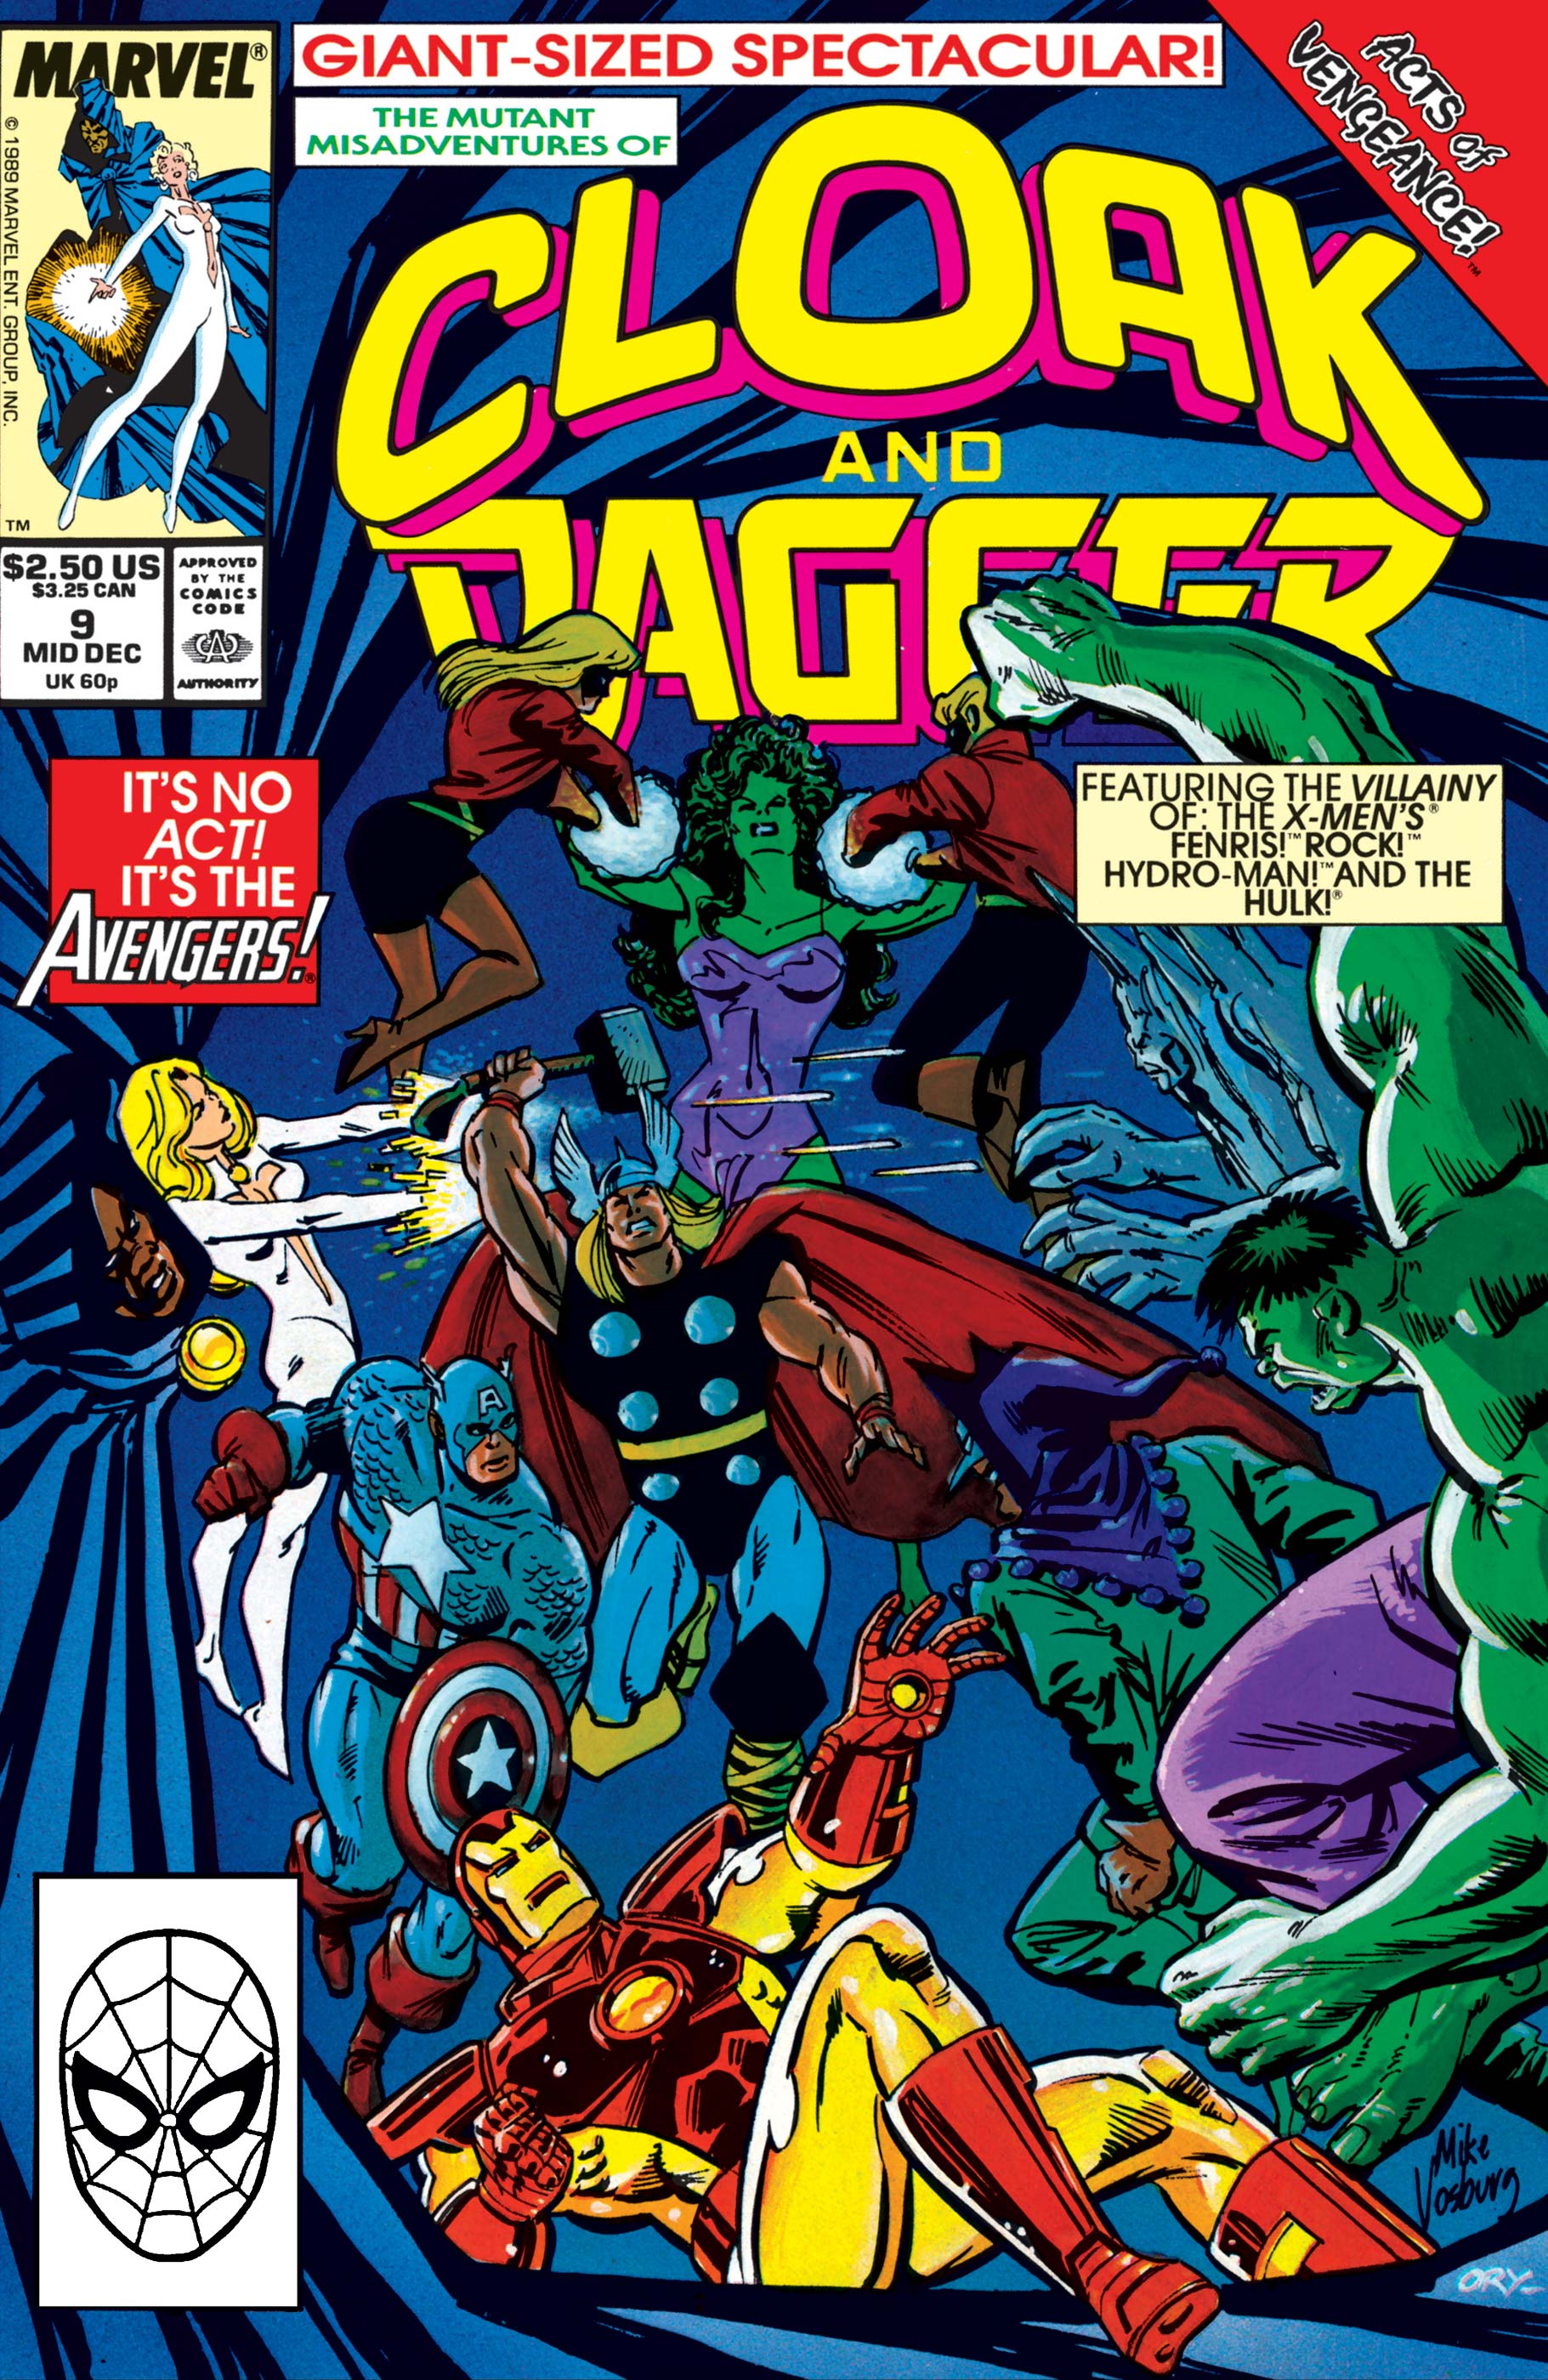 The Mutant Misadventures of Cloak and Dagger (1988) #9